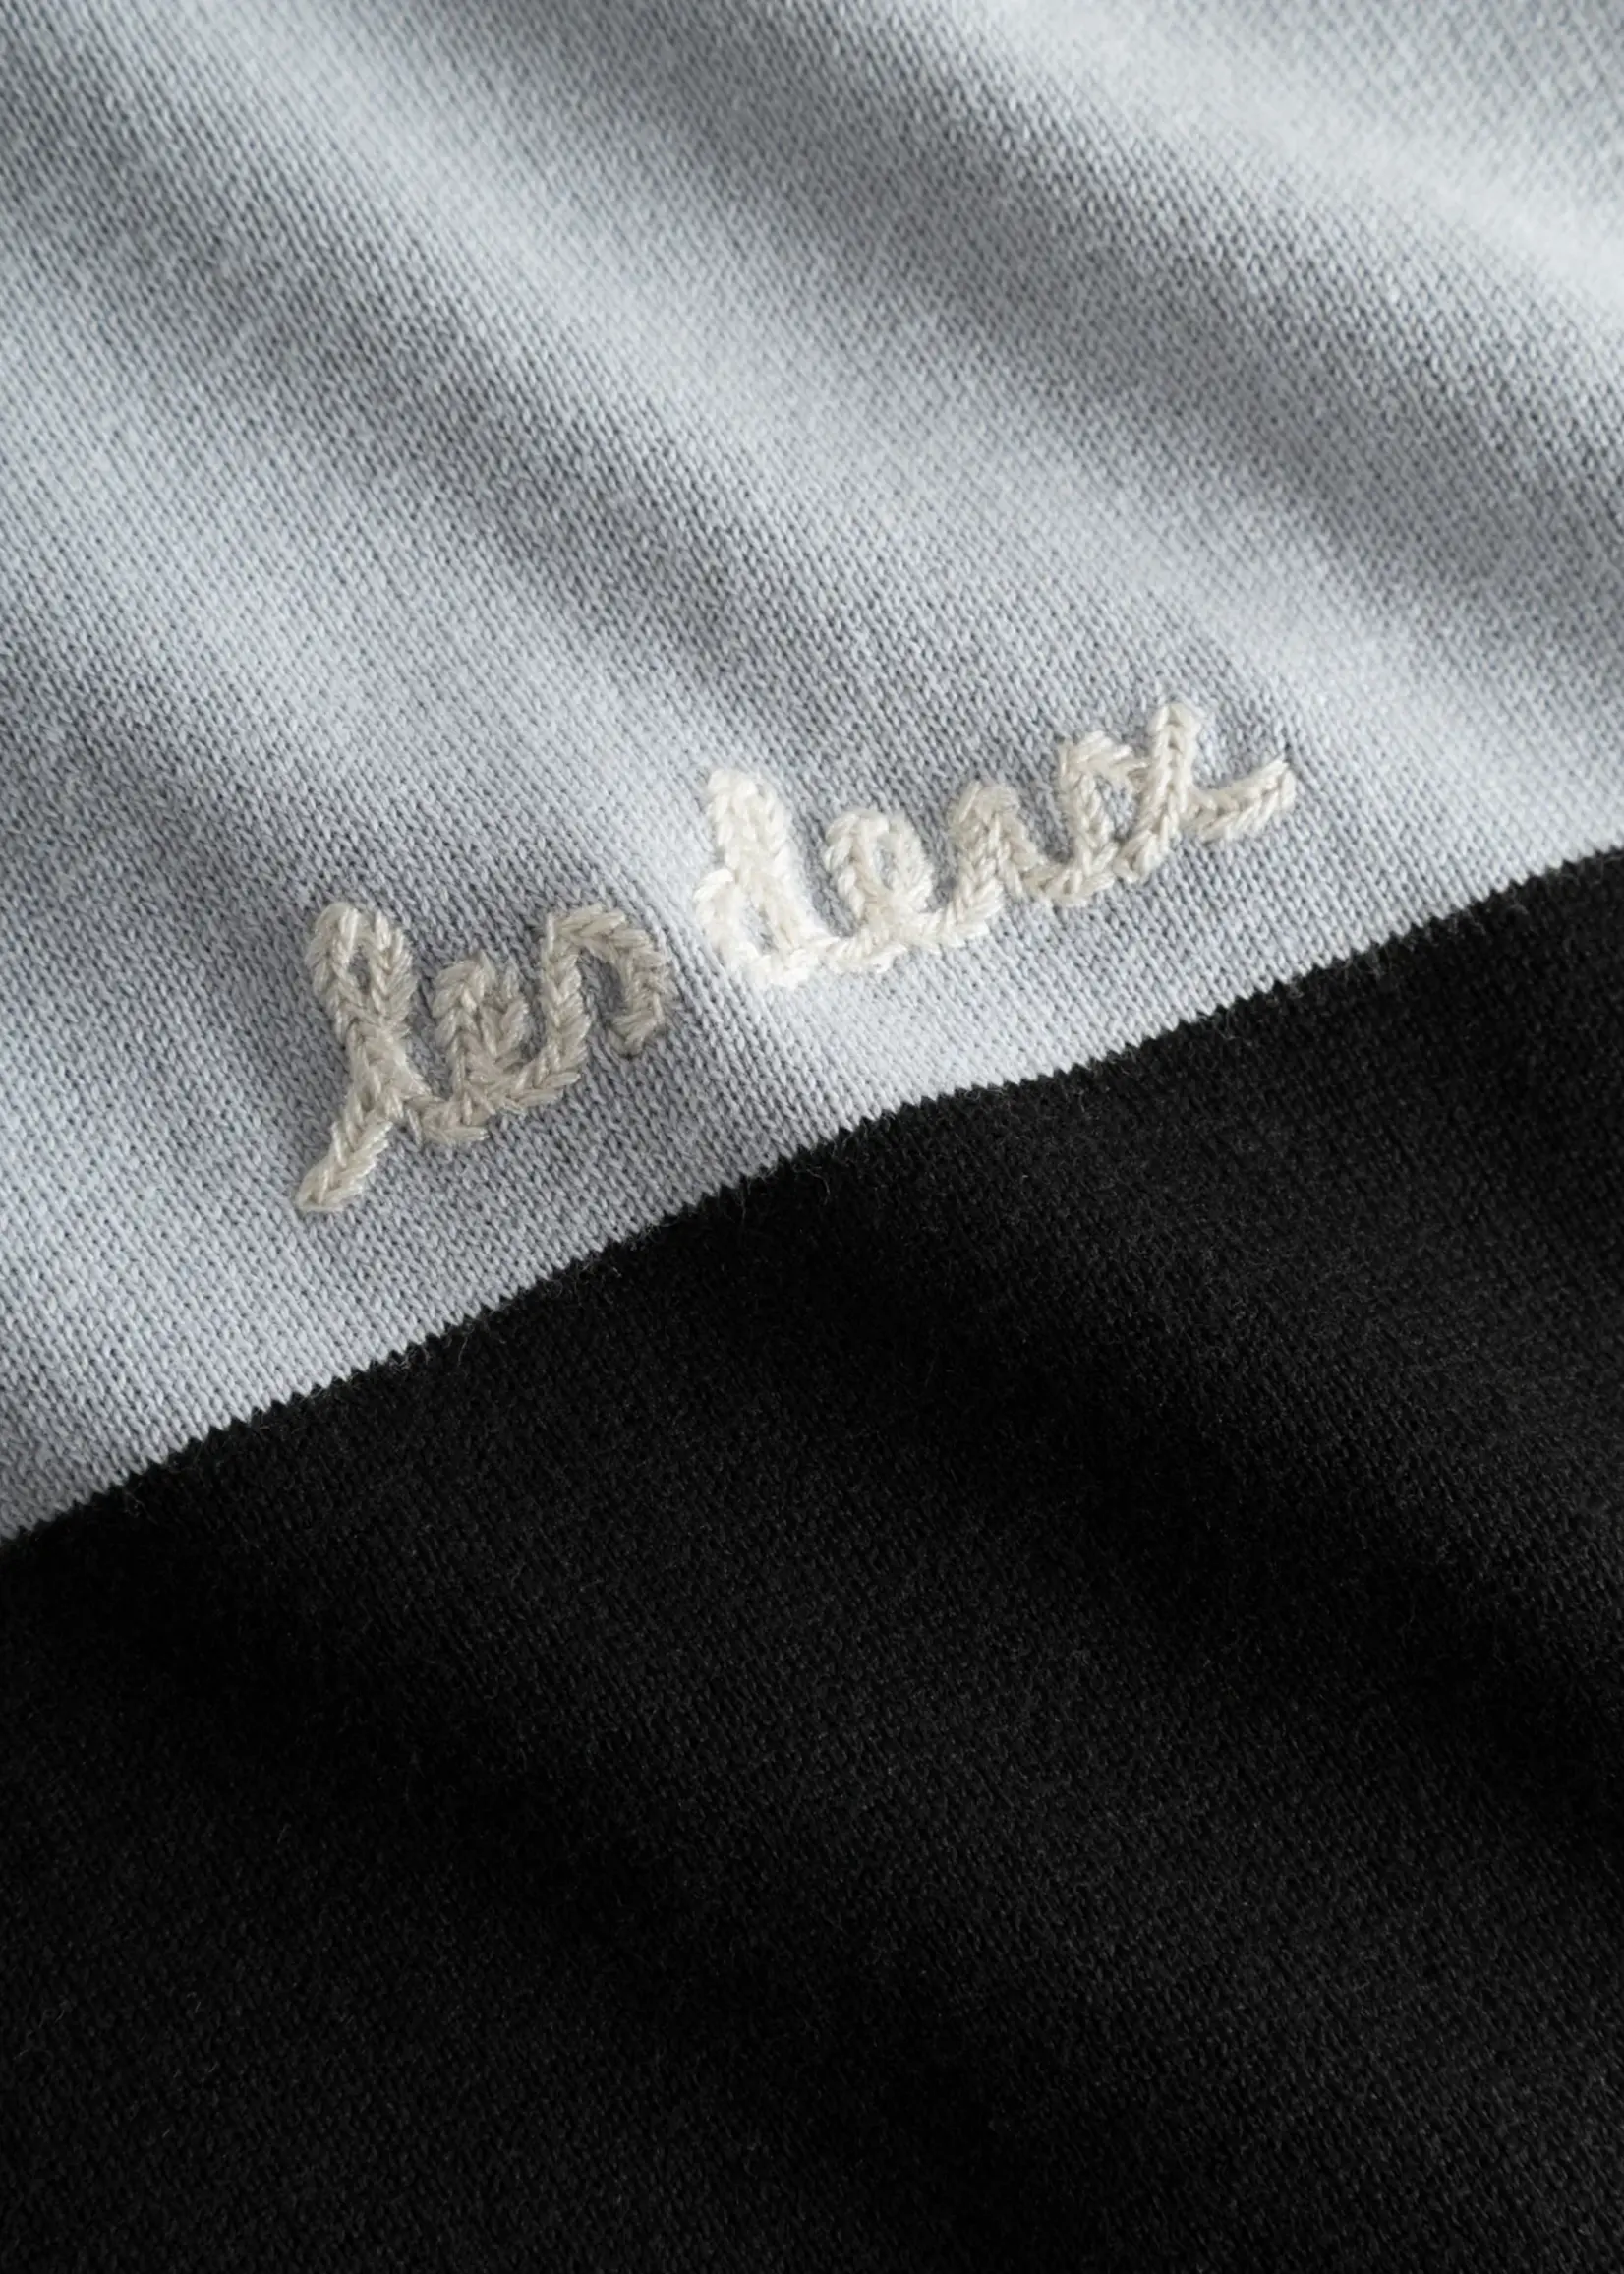 Les Deux Les Deux Raul Knitted Polo Pearl Blue/Ivory